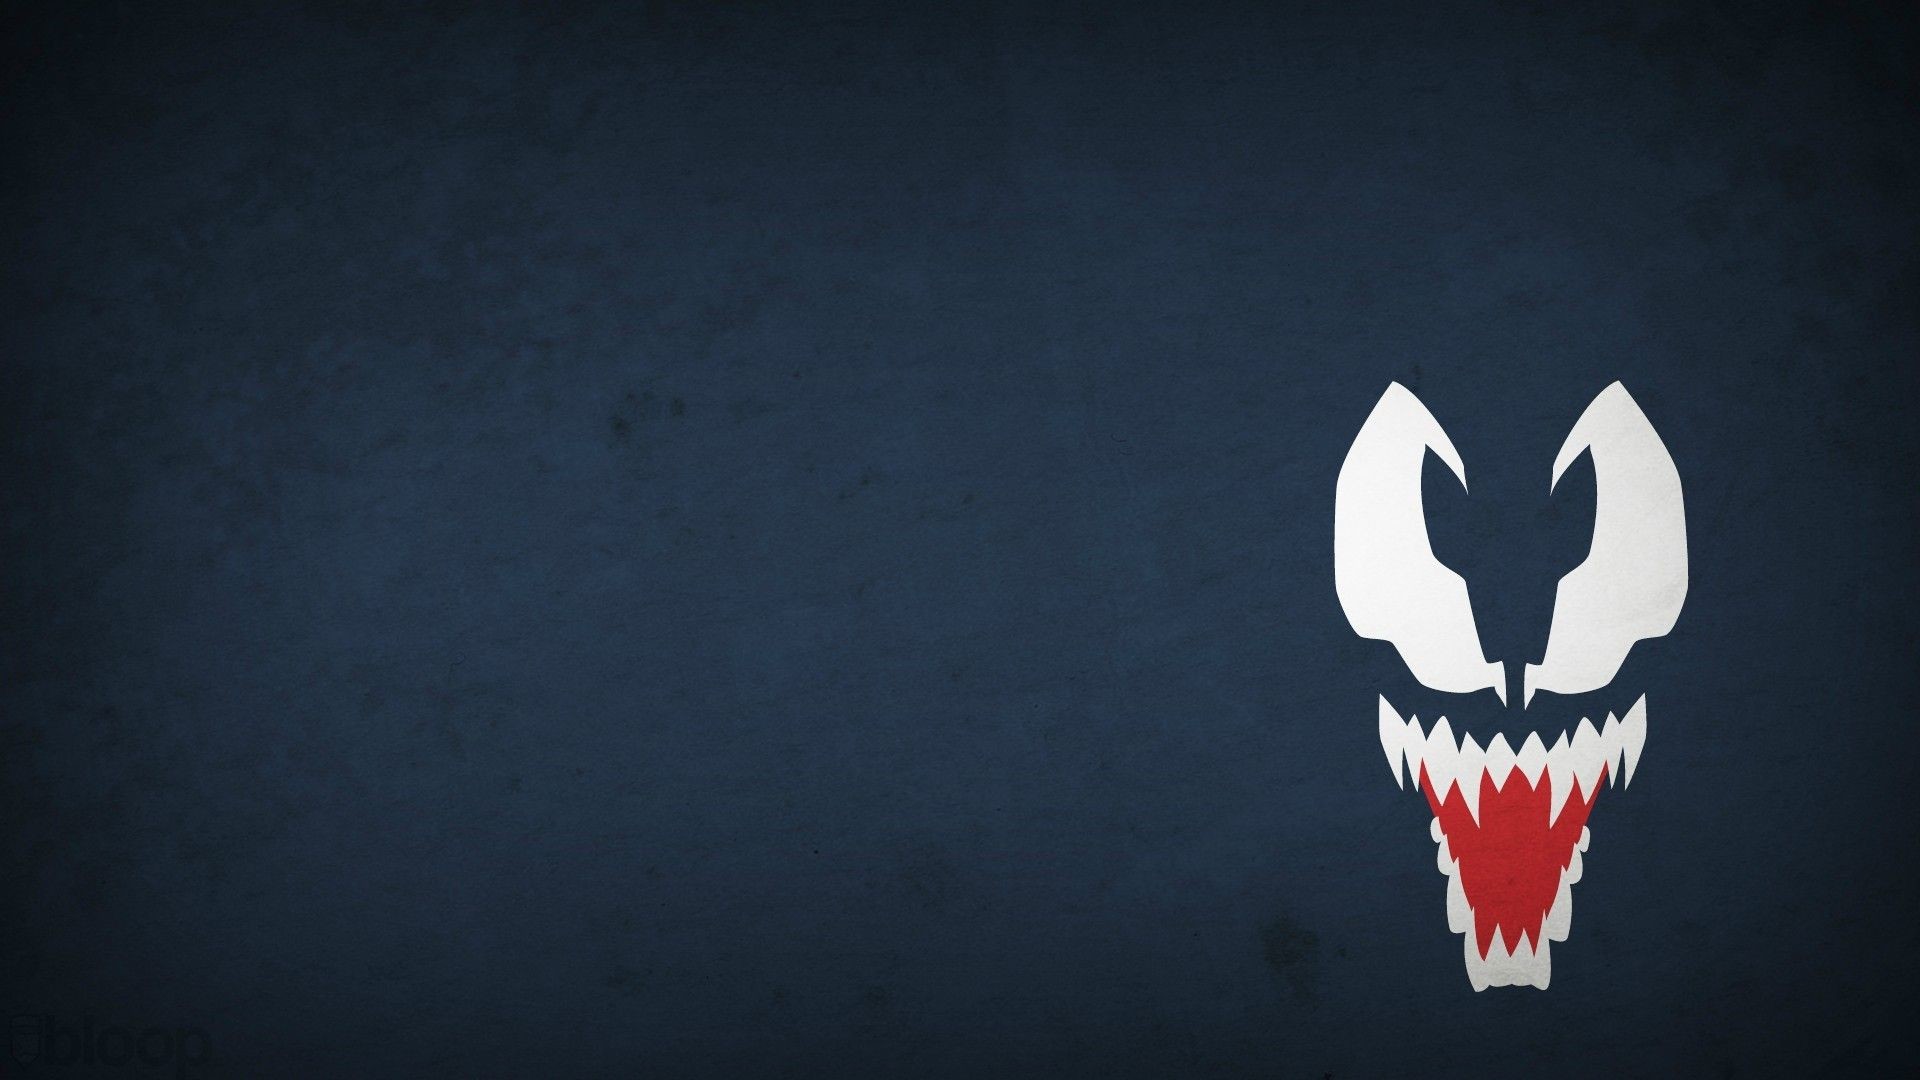 1920x1080 Minimalistic Venom Marvel Comics Villian Minimalistic Venom Marvel Comics  Villian is an HD desktop wallpaper posted in our free image collection of  ...